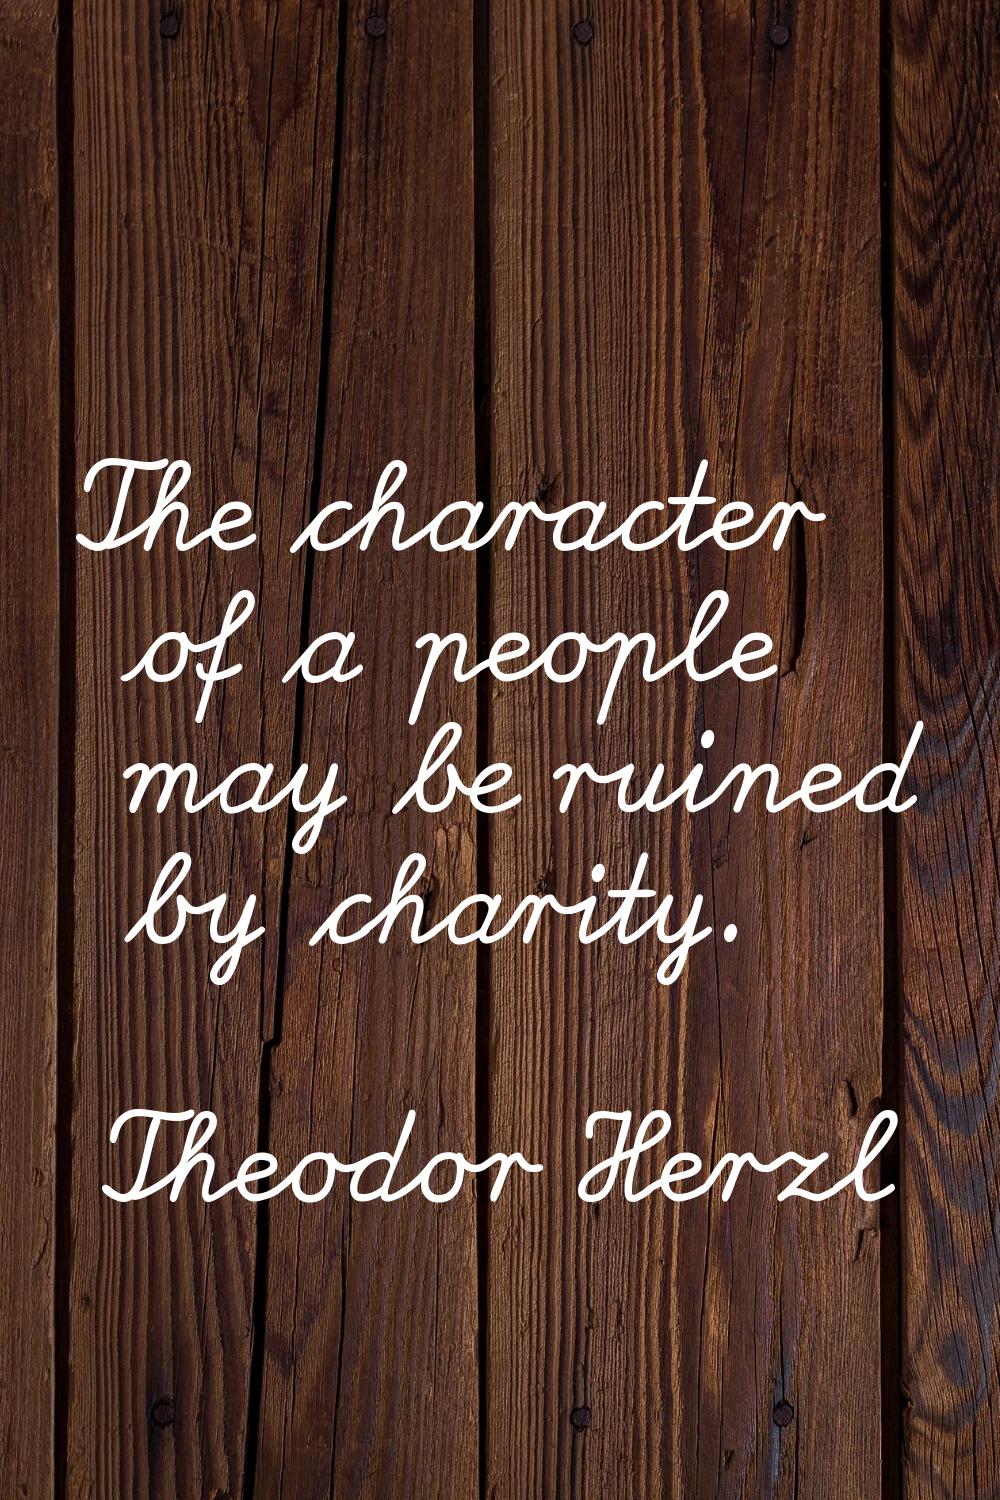 The character of a people may be ruined by charity.